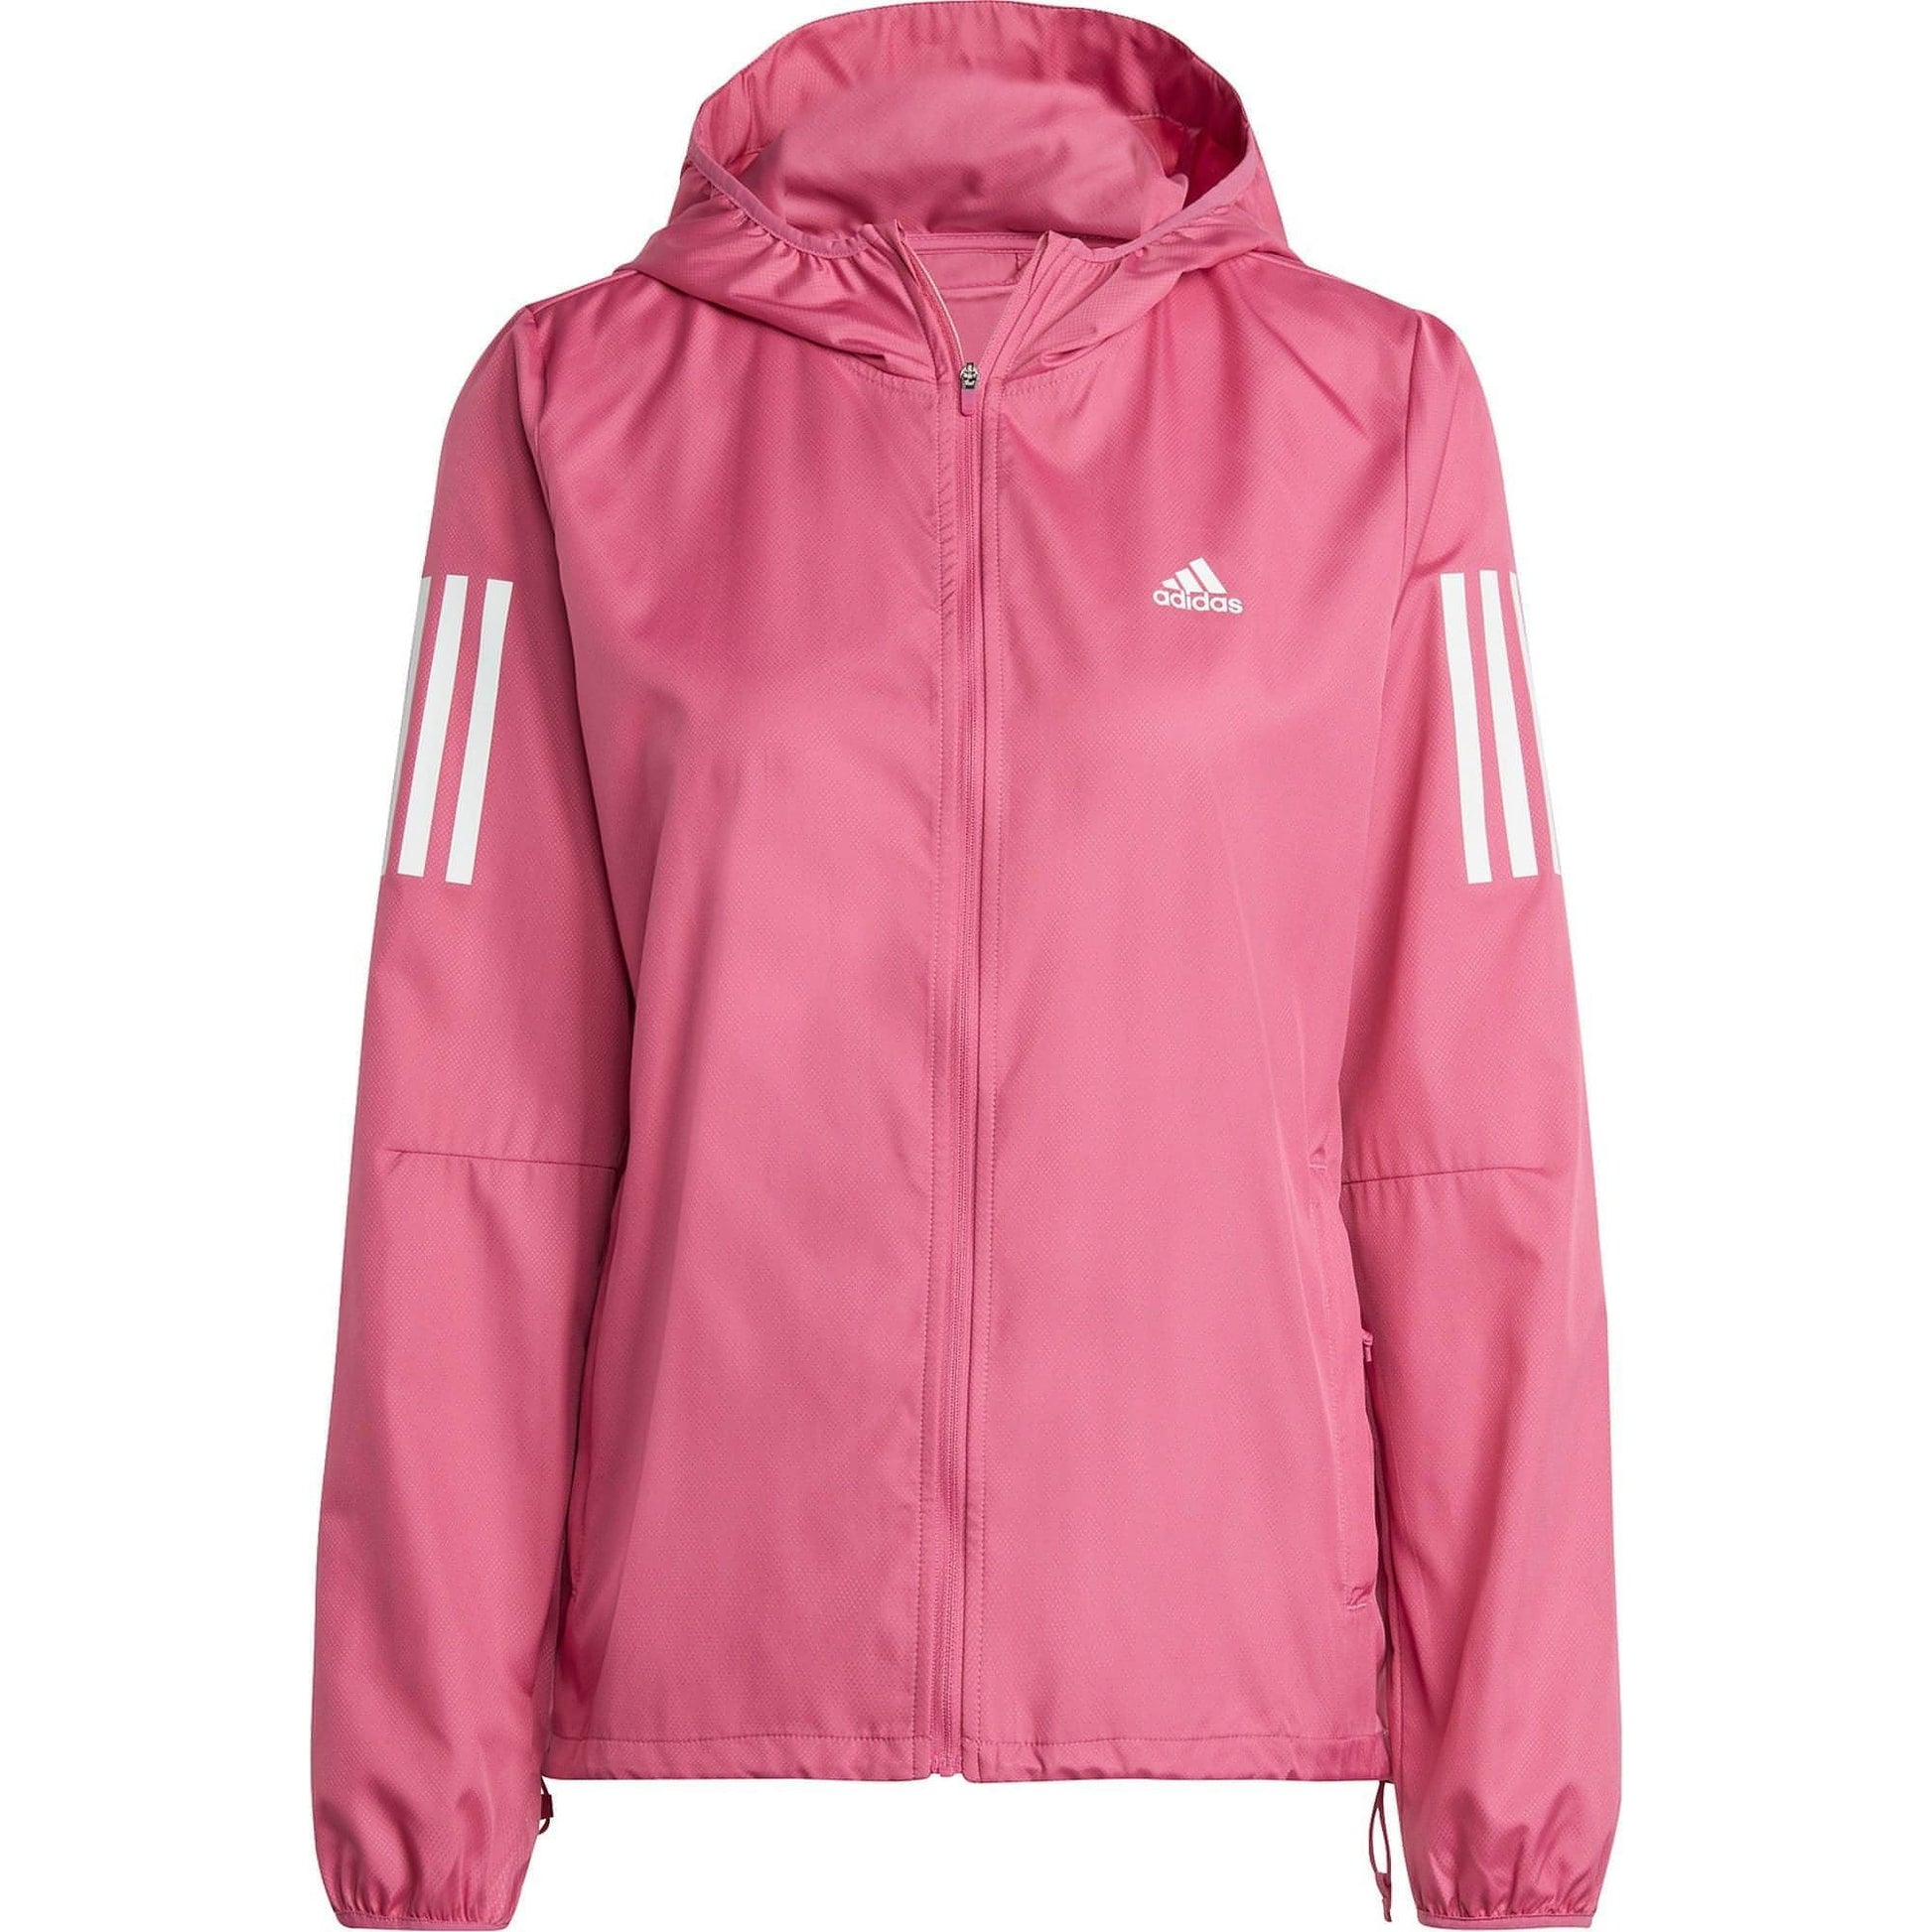 Adidas Own The Run Windbreaker Jacket Hm4255 Front - Front View